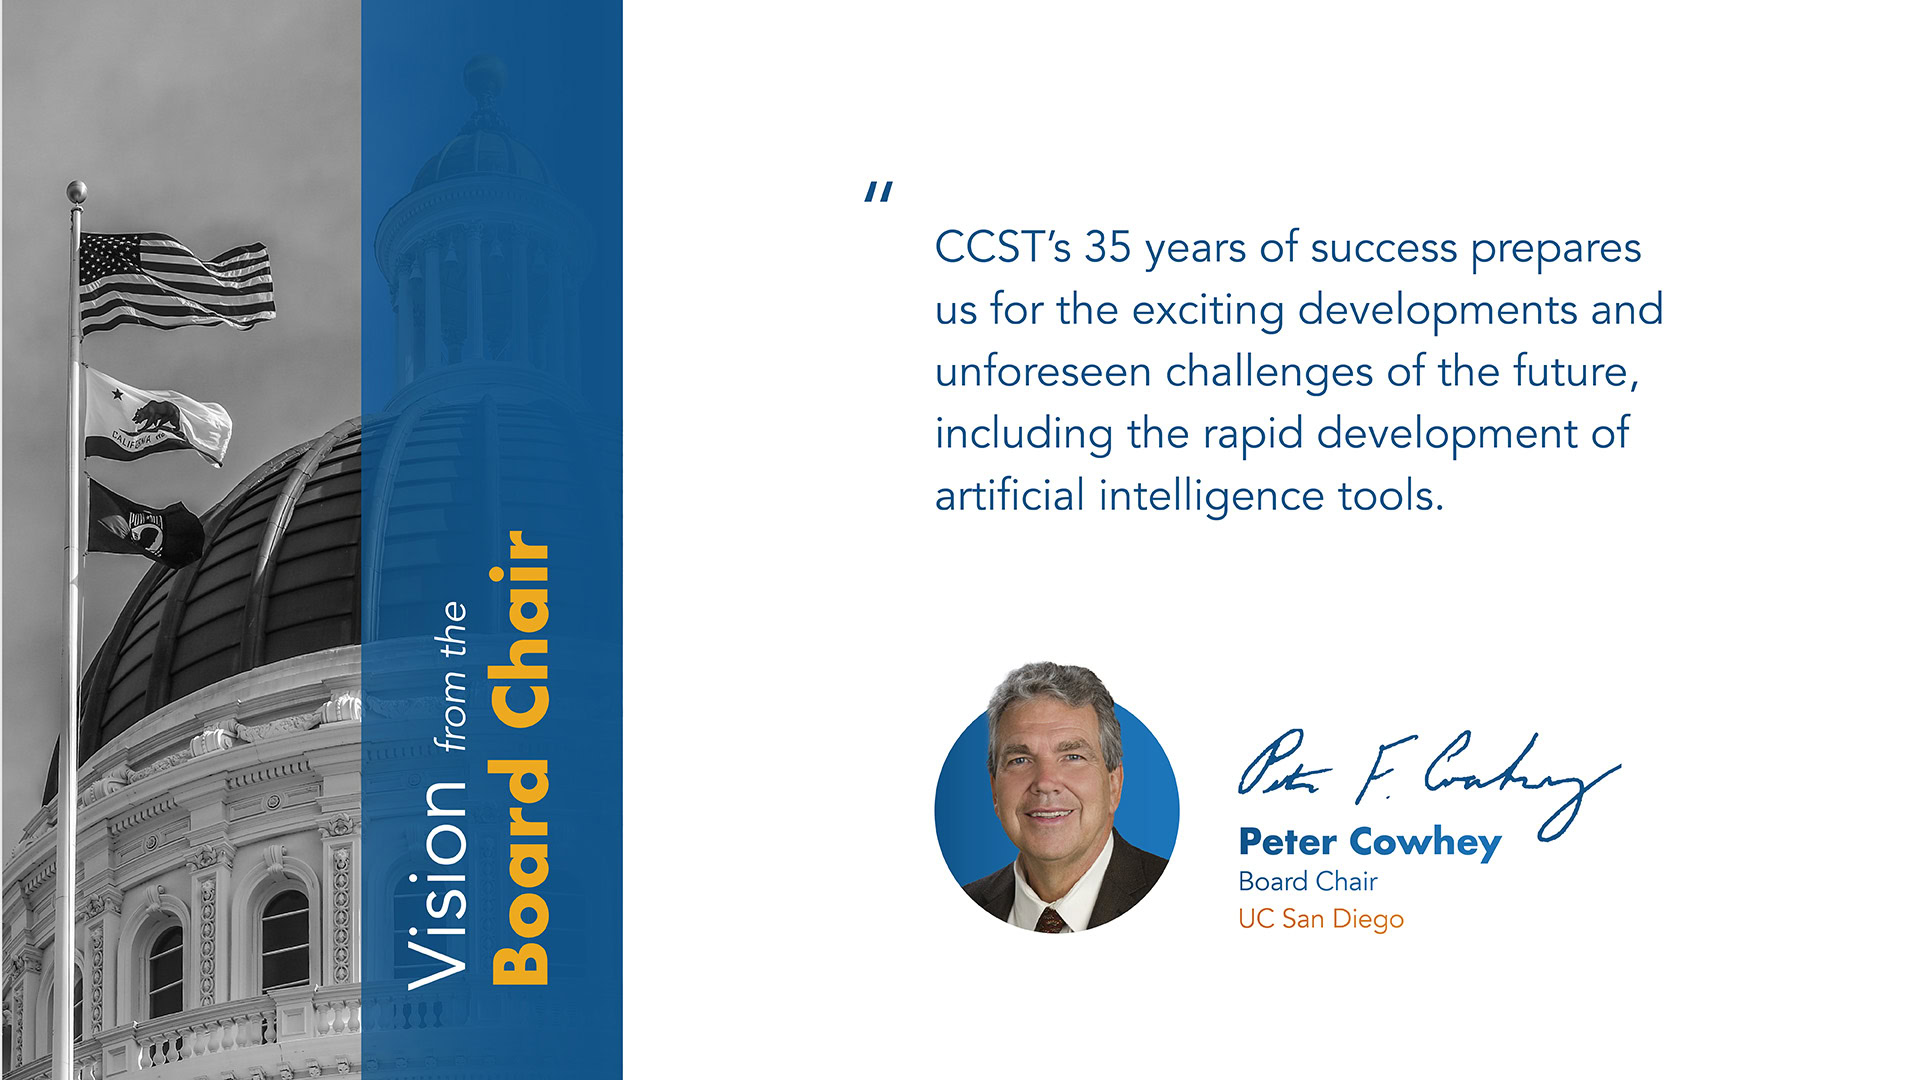 A graphic with a left hand black and white column with a photo of the California State Capitol and flags waving, a blue column with text that says Vision from the Board Chair, and a white column with a quote and image of Board Chair Peter Cowley: "CCST’s 35 years of success prepares us for the exciting developments and unforeseen challenges of the future, including the rapid development of artificial intelligence tools."